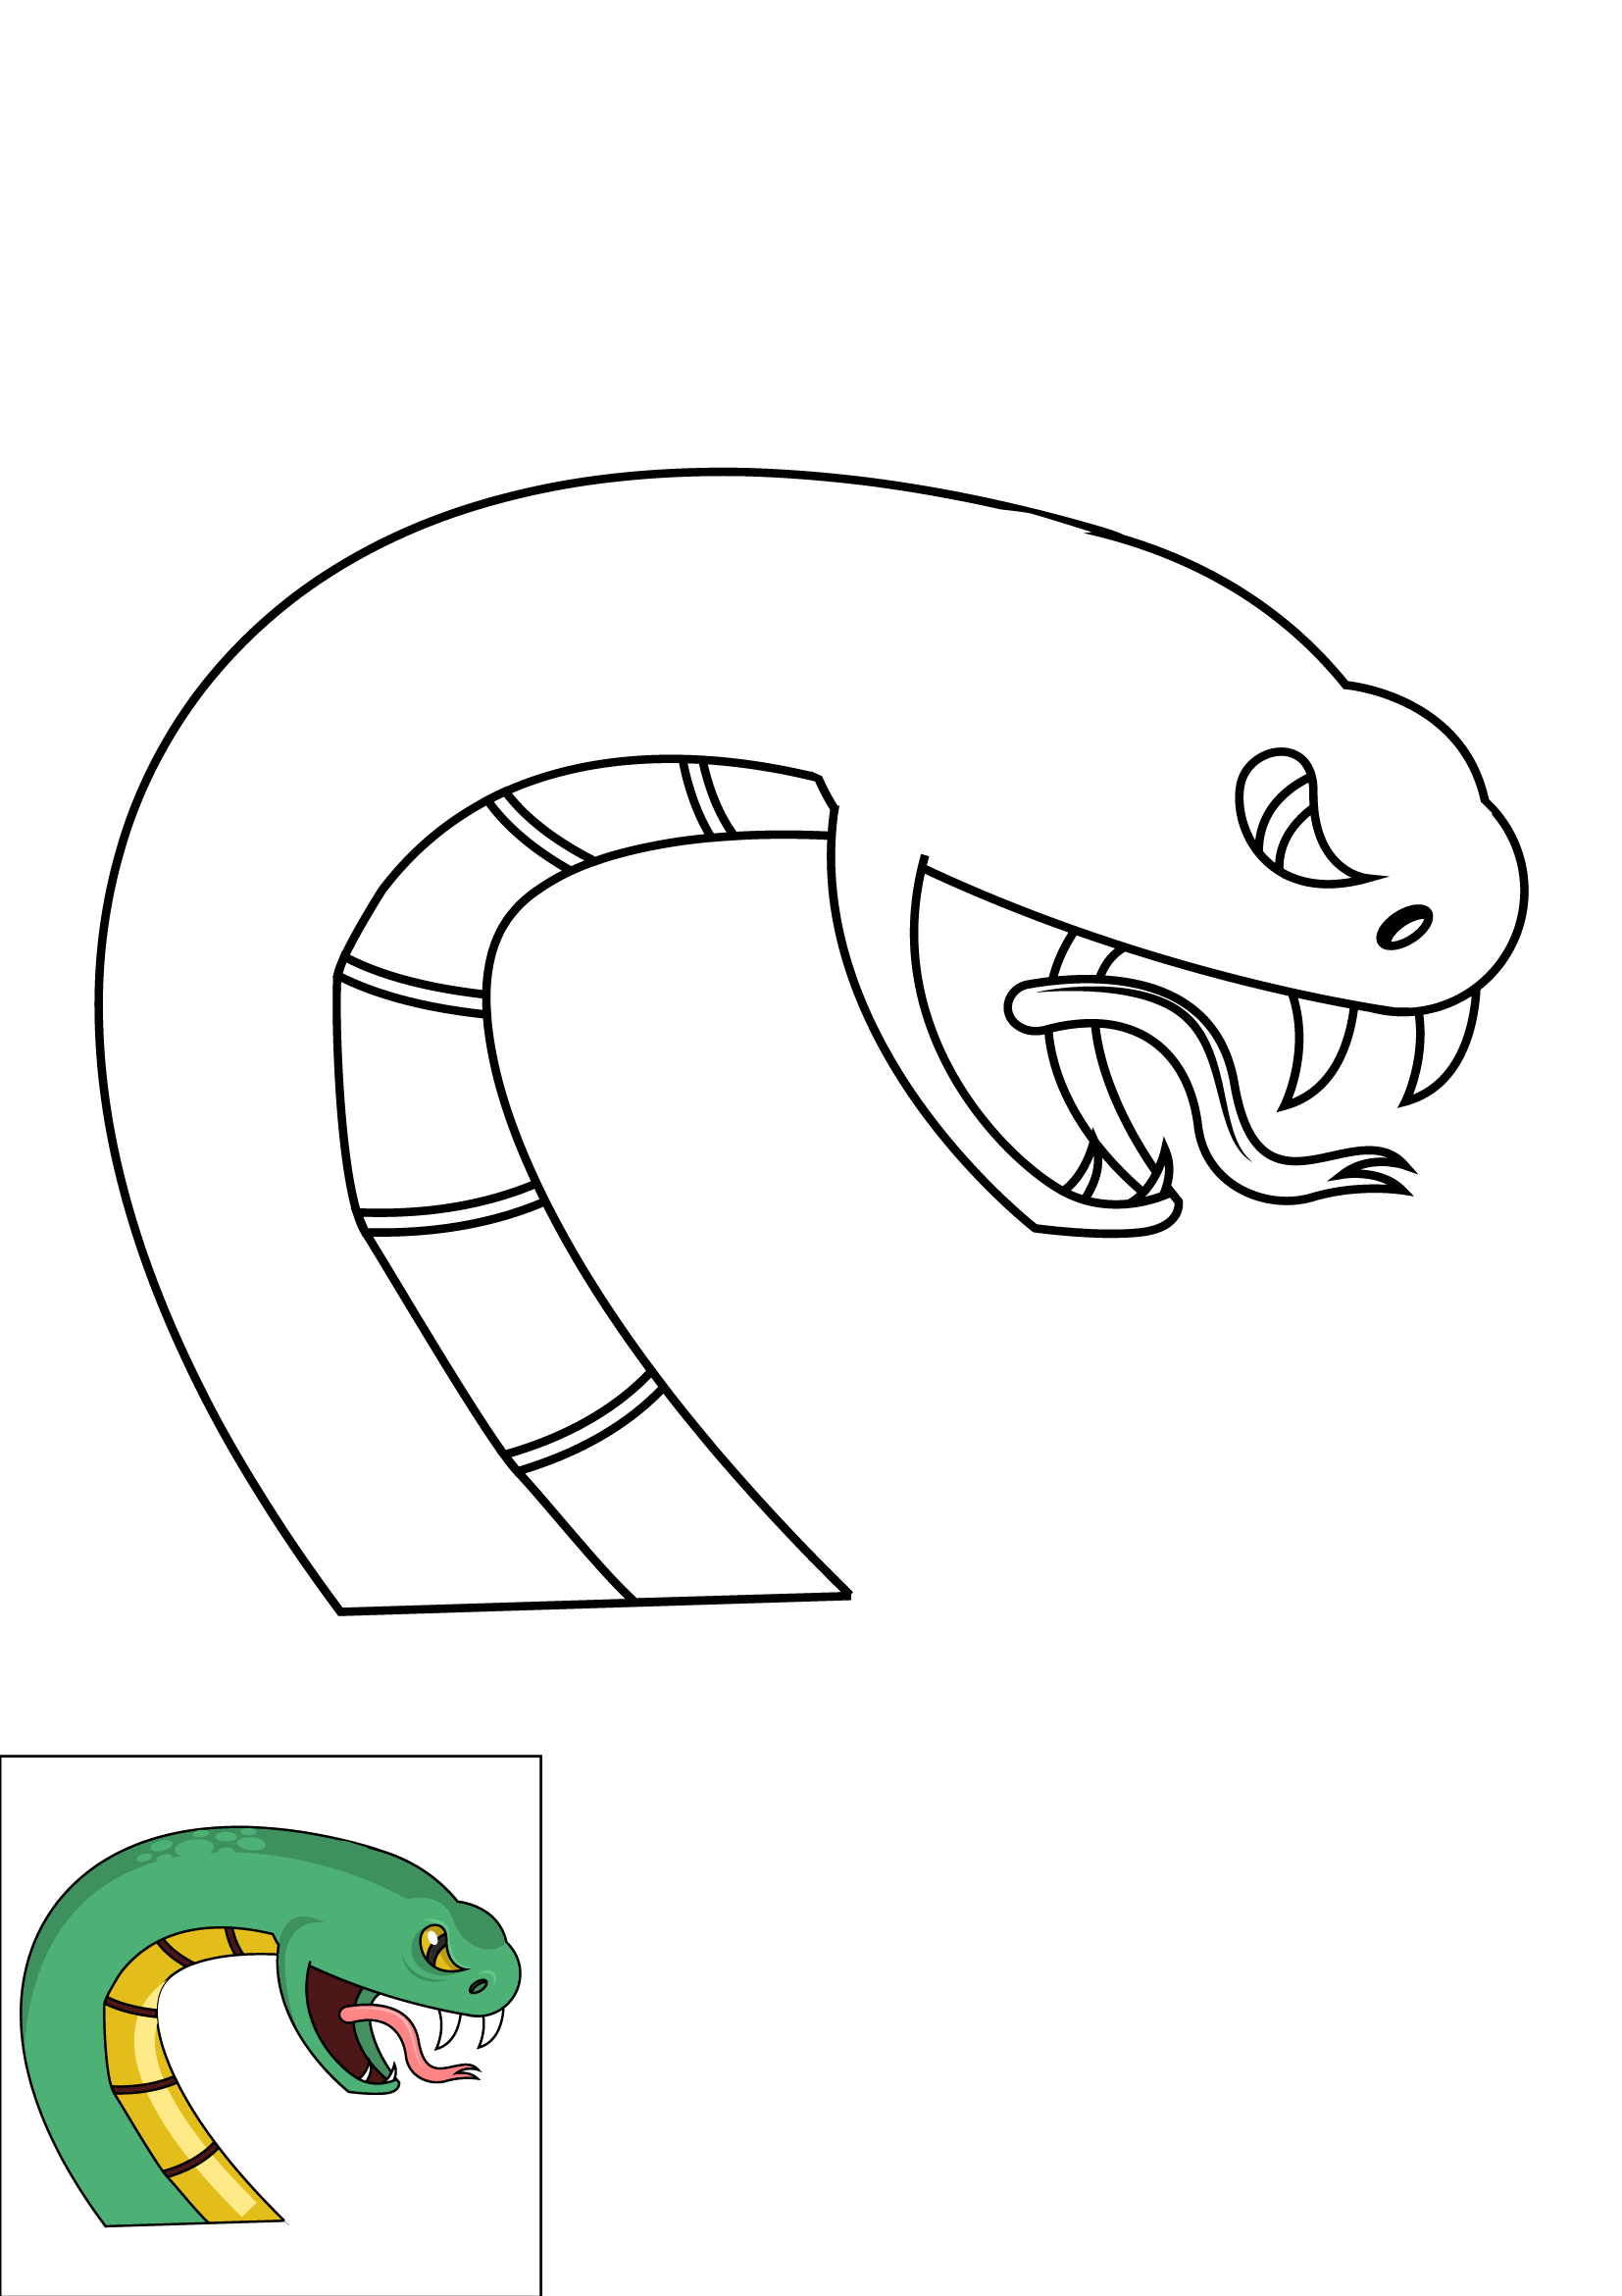 How to Draw A Snake Head Step by Step Printable Color